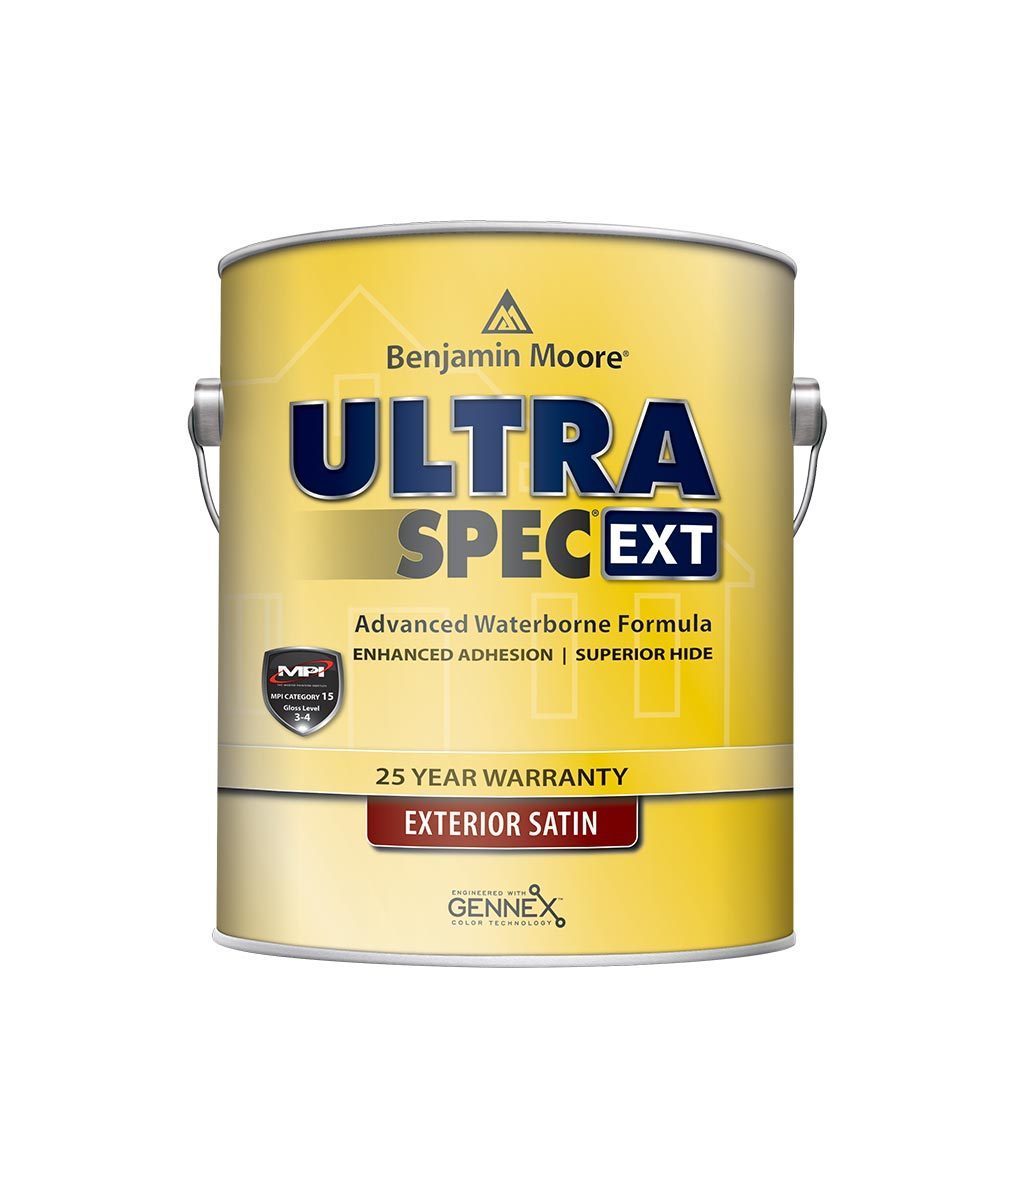 Benjamin Moore Ultra Spec EXT exterior paint in satin finish available at Johnson Paint & Maine Paint in MA, NH & ME. 